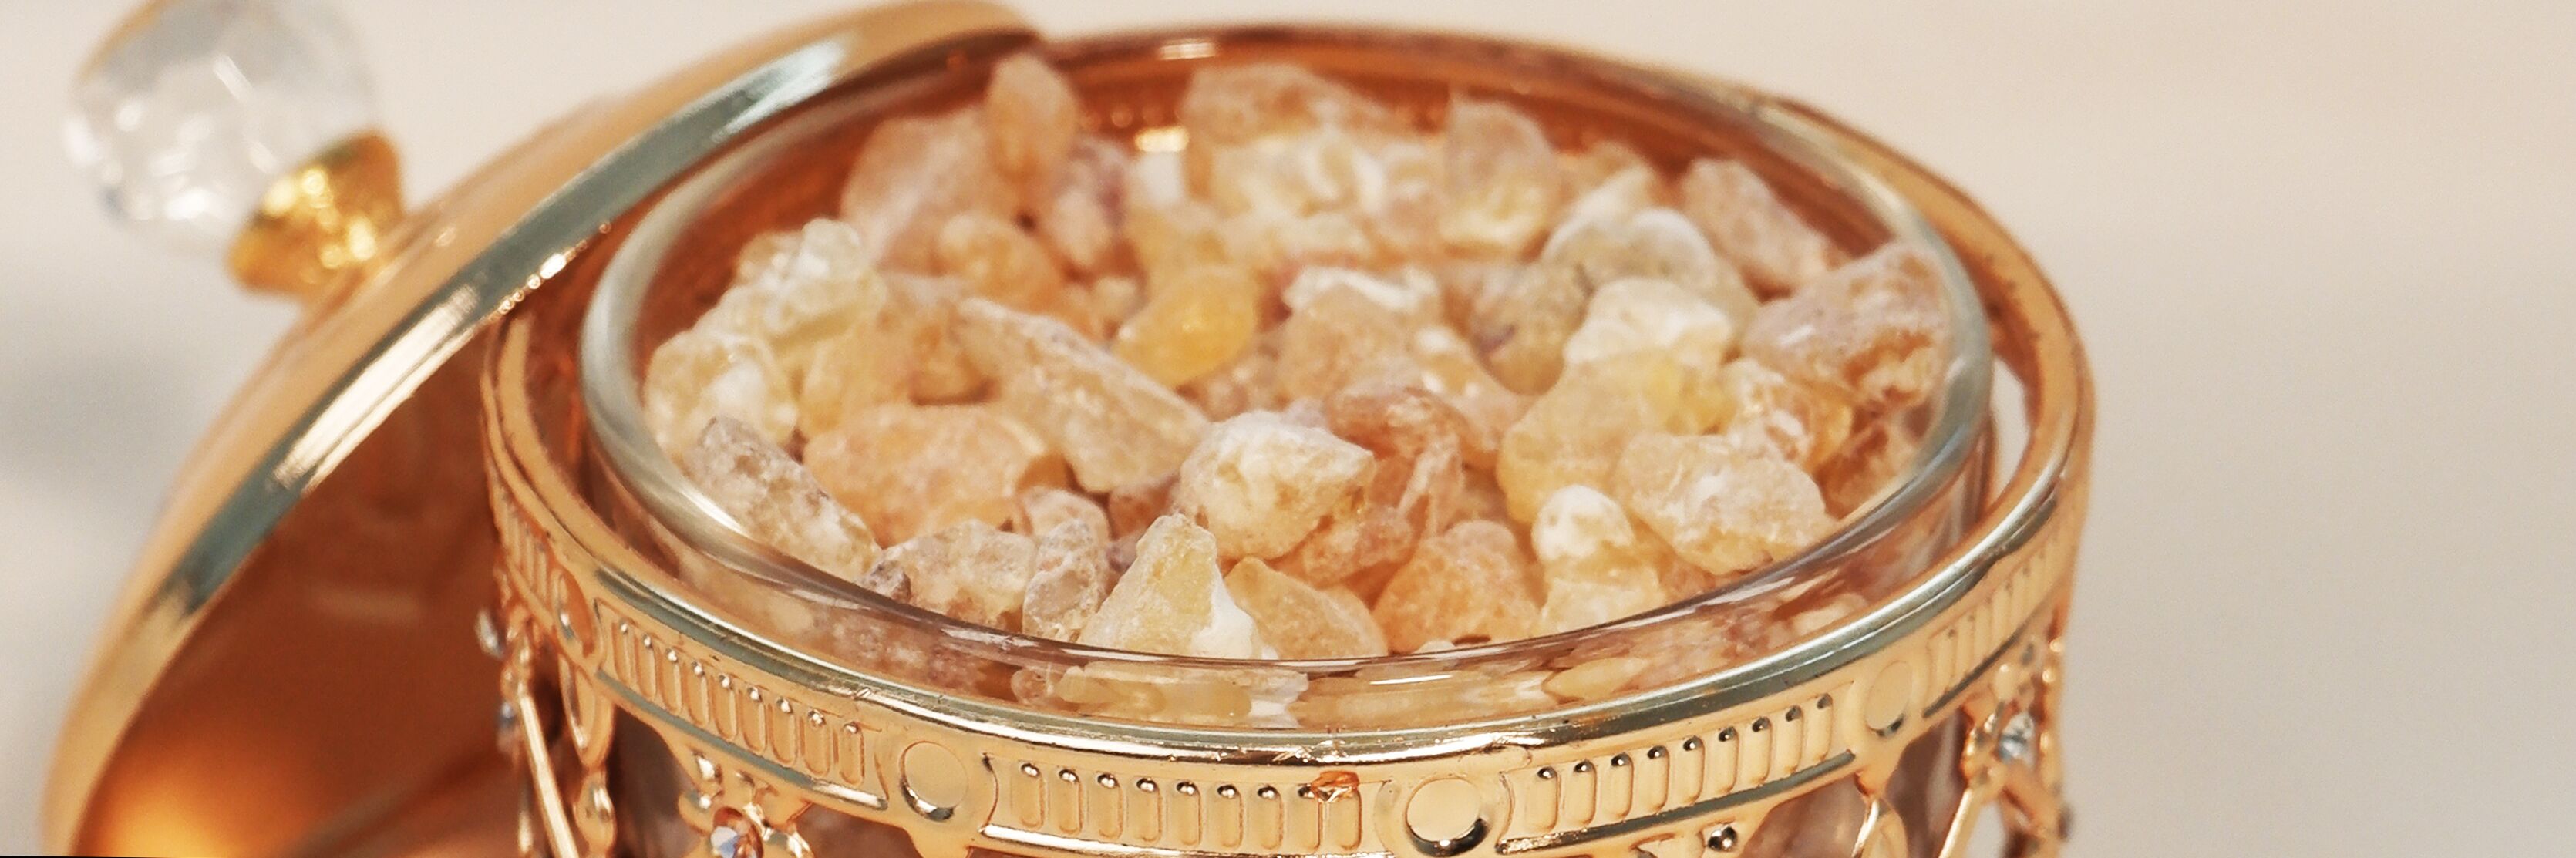 Five Benefits of Luban (Chewing Gum) - Frankincense